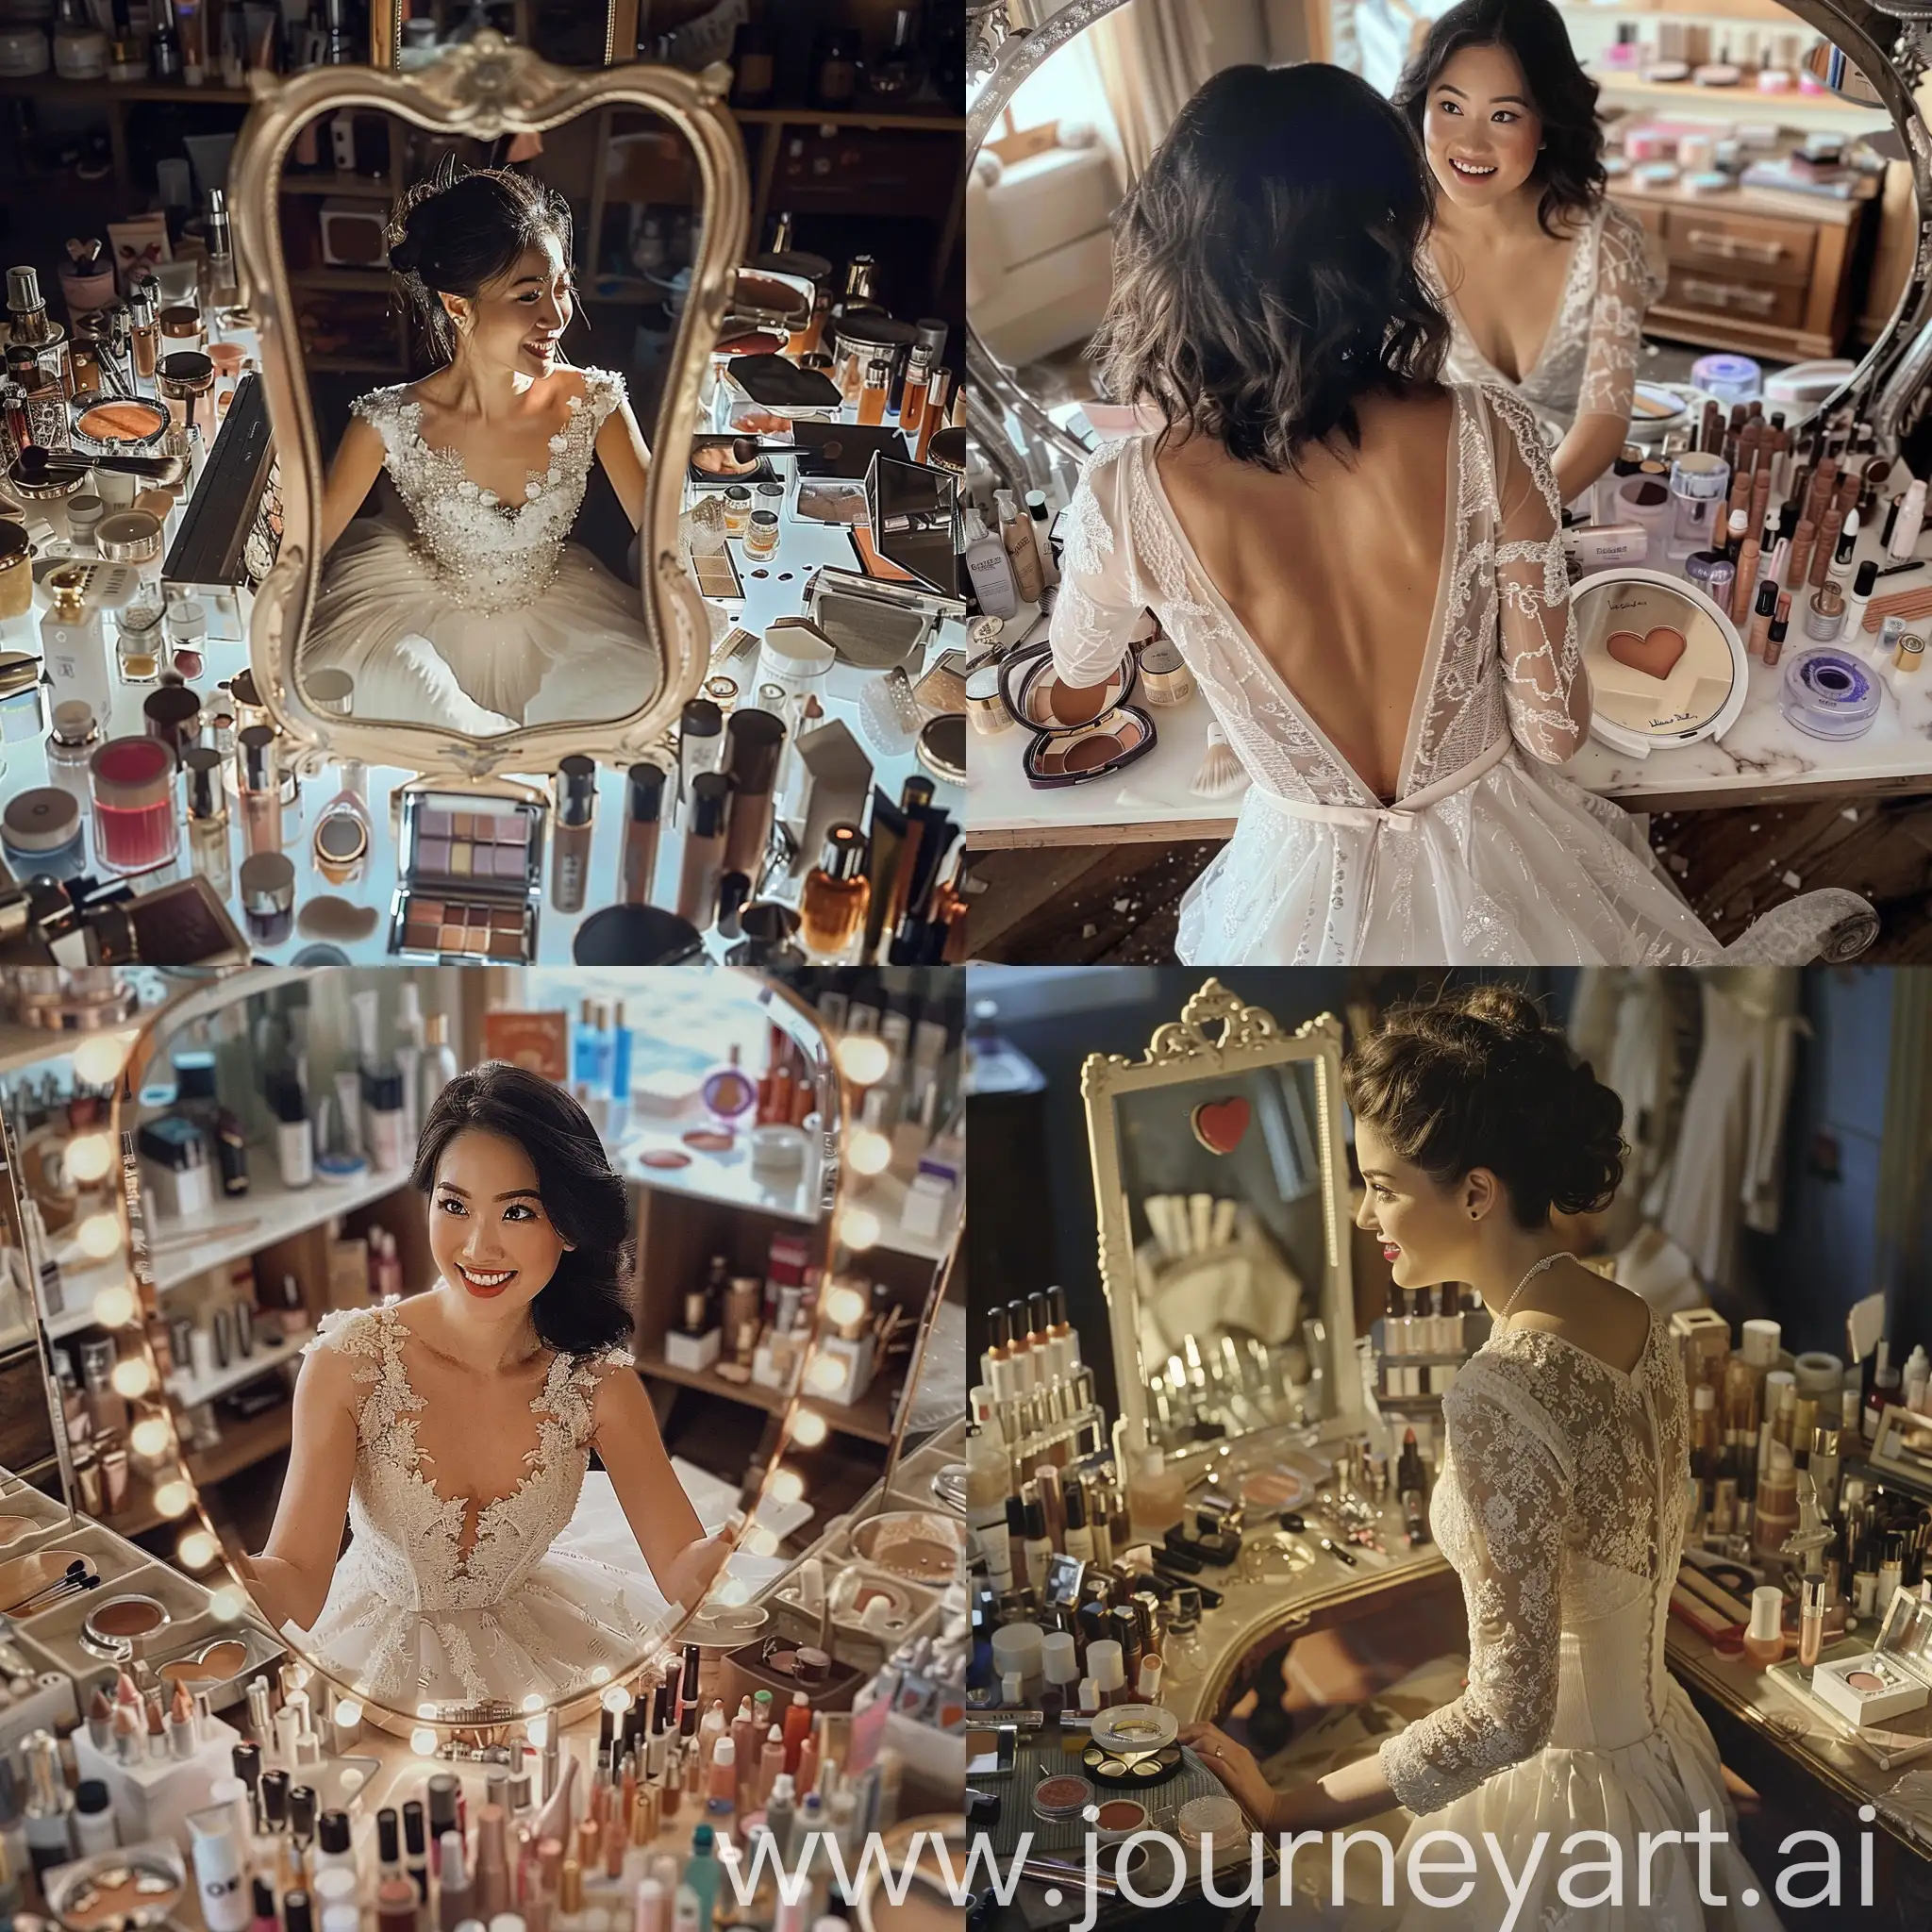 Woman-in-White-Dress-Smiling-at-Heart-Reflection-in-Mirror-Amidst-Cosmetics